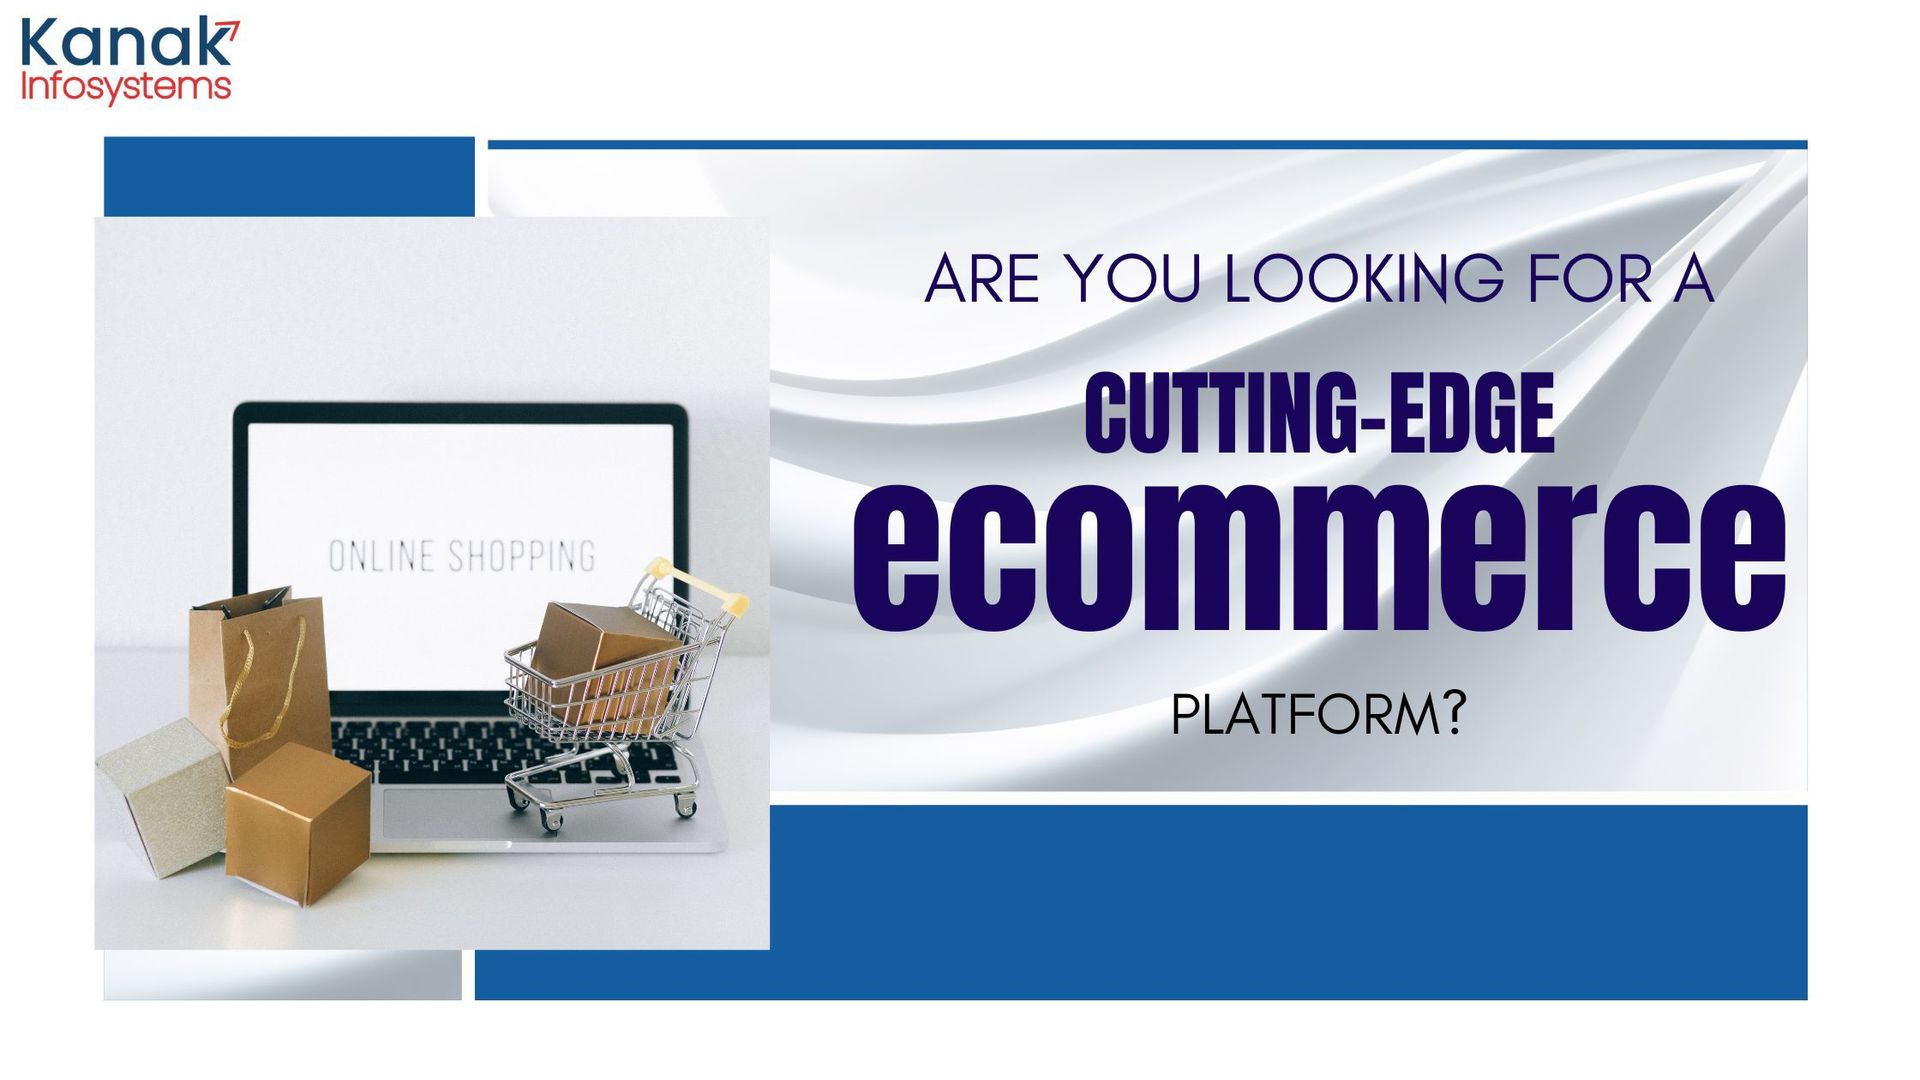 Are you Looking for a Cutting Edge Ecommerce Platform